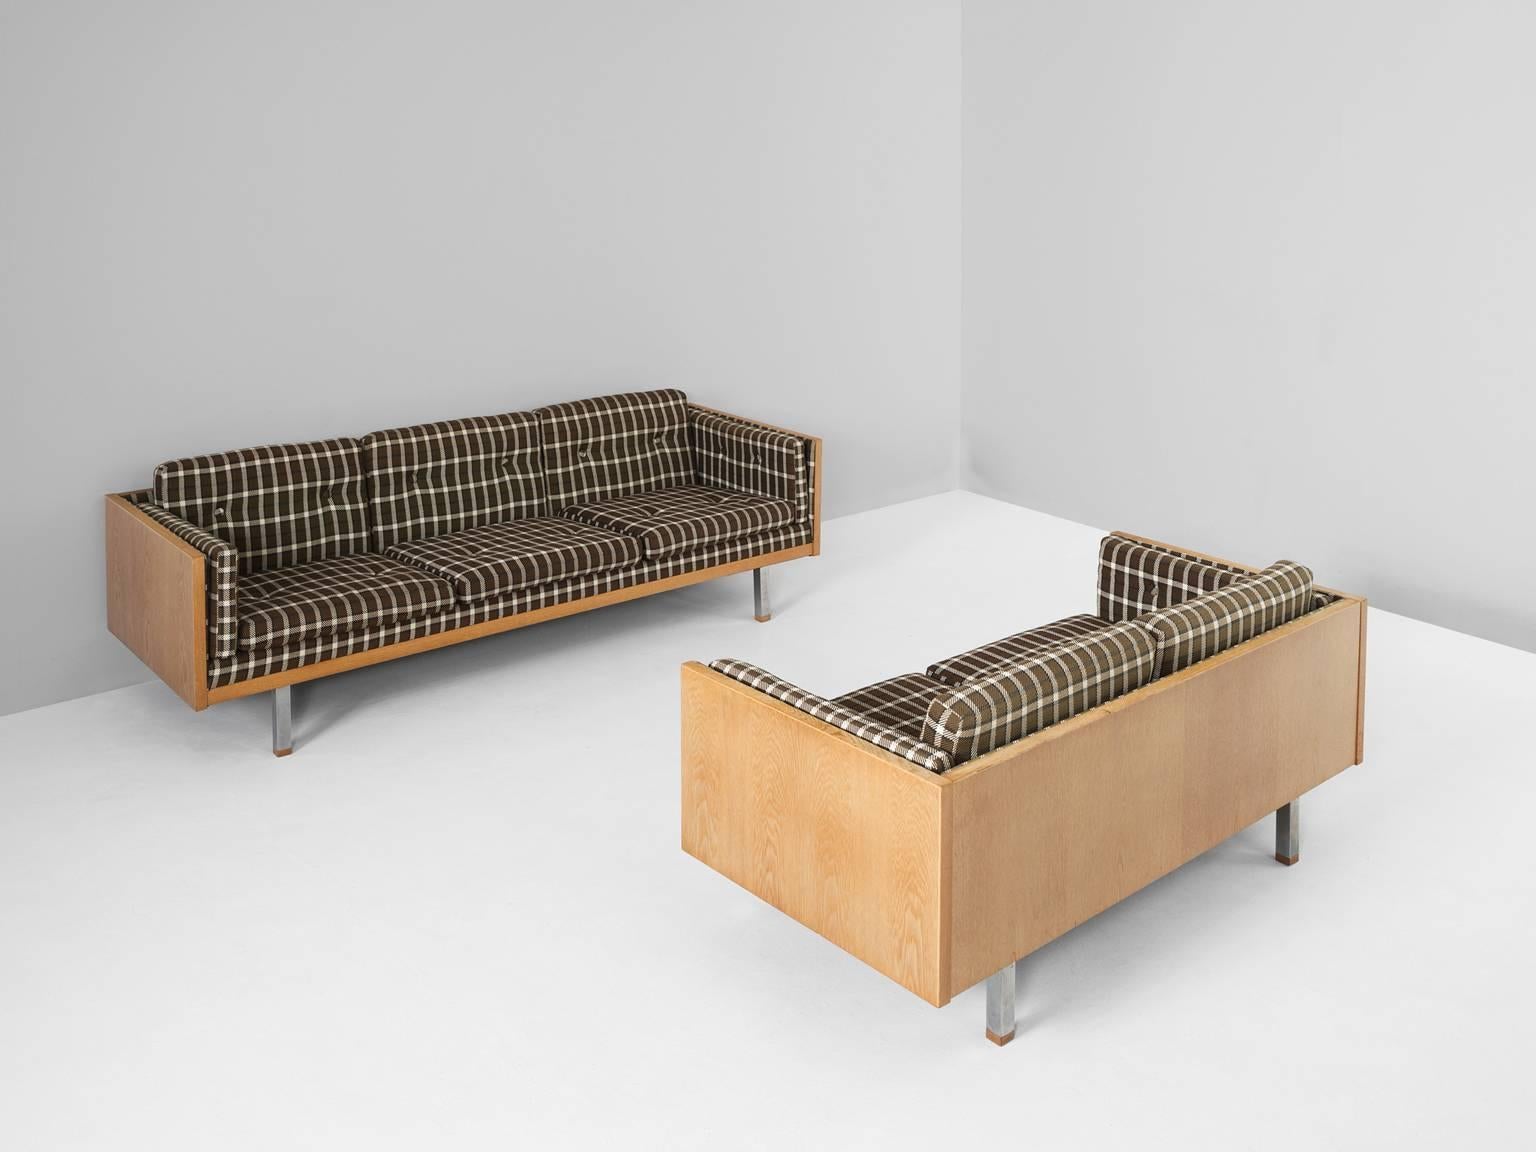 Three and two-seat sofa, in oak, metal and fabric, Denmark, 1960s.

Scandinavian living room set, a two and three-seat sofa. The frame consist of oak with cubic metal legs, which provide an open look to the quite solid seating of the sofa's. All